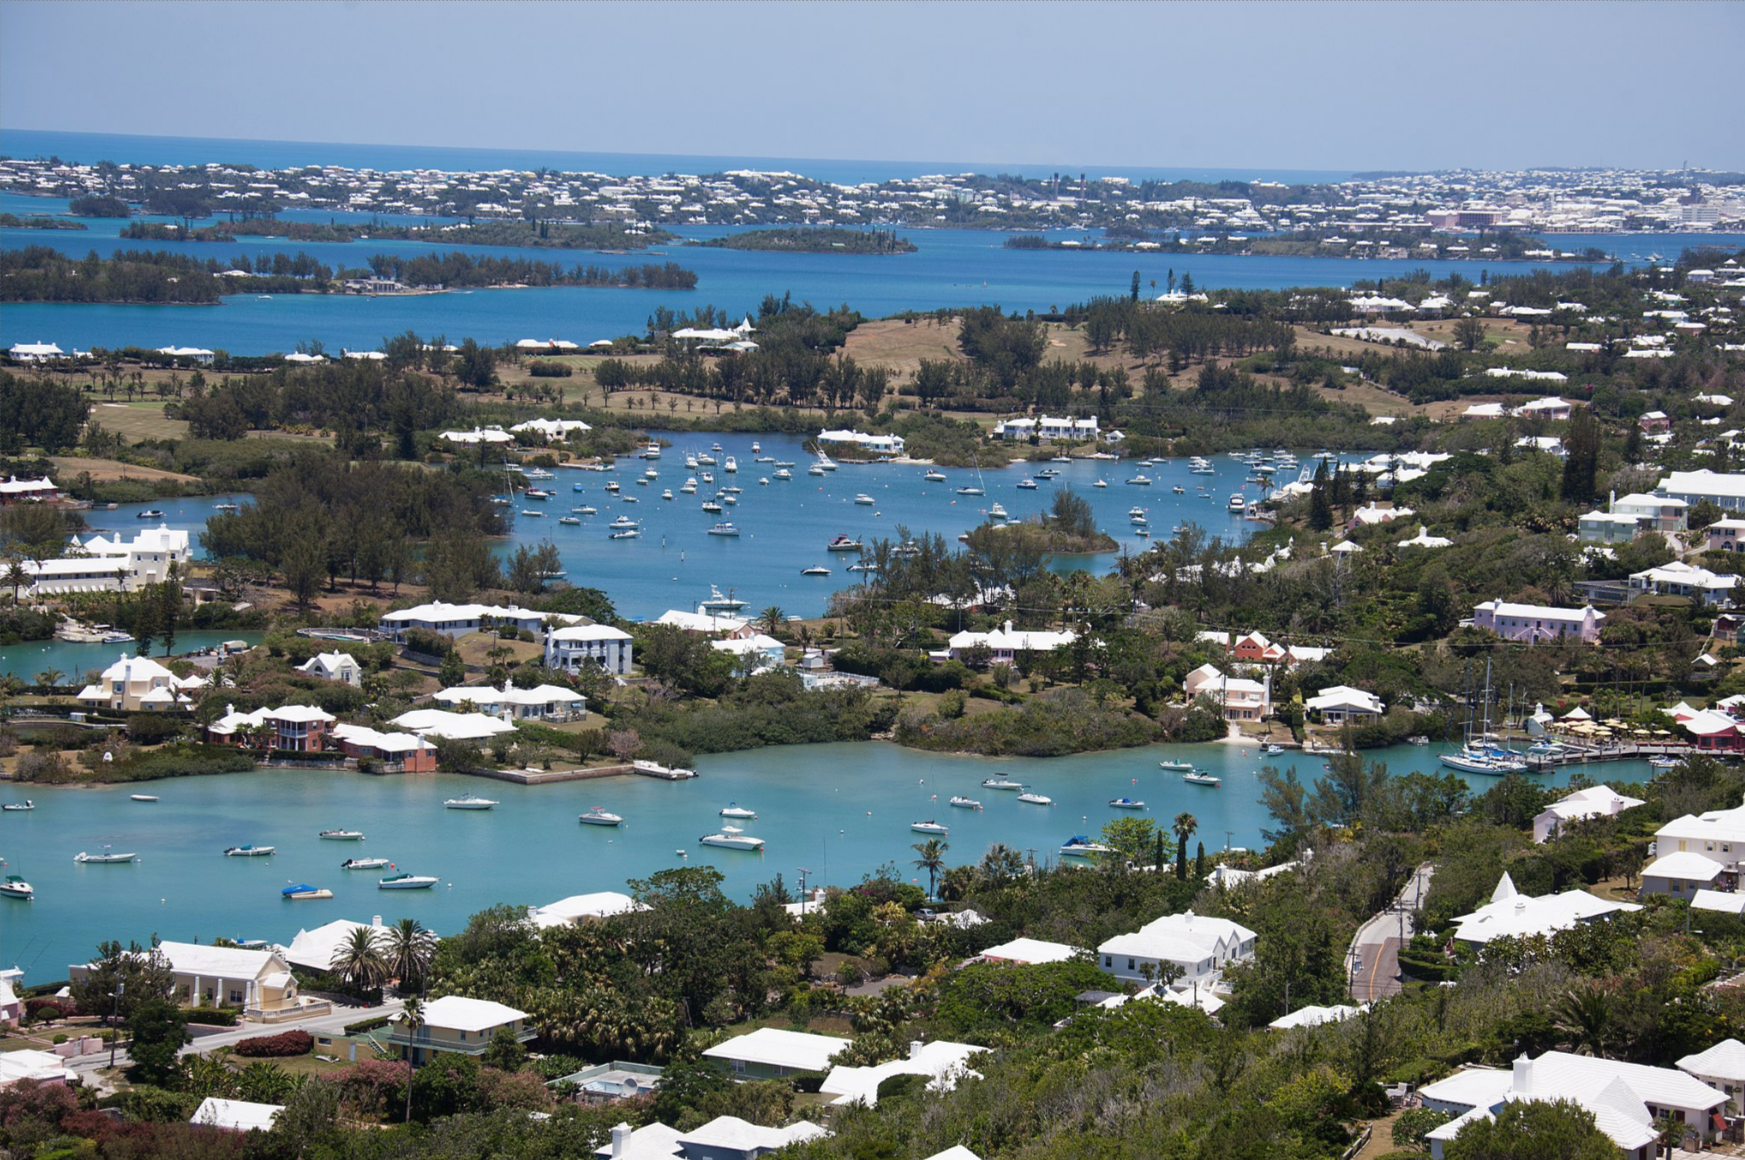 2048px-View-from-top-of-Gibbs-Lighthouse-Bermuda-jpg -2048×1365- 11-10-2018 13-10-09-1